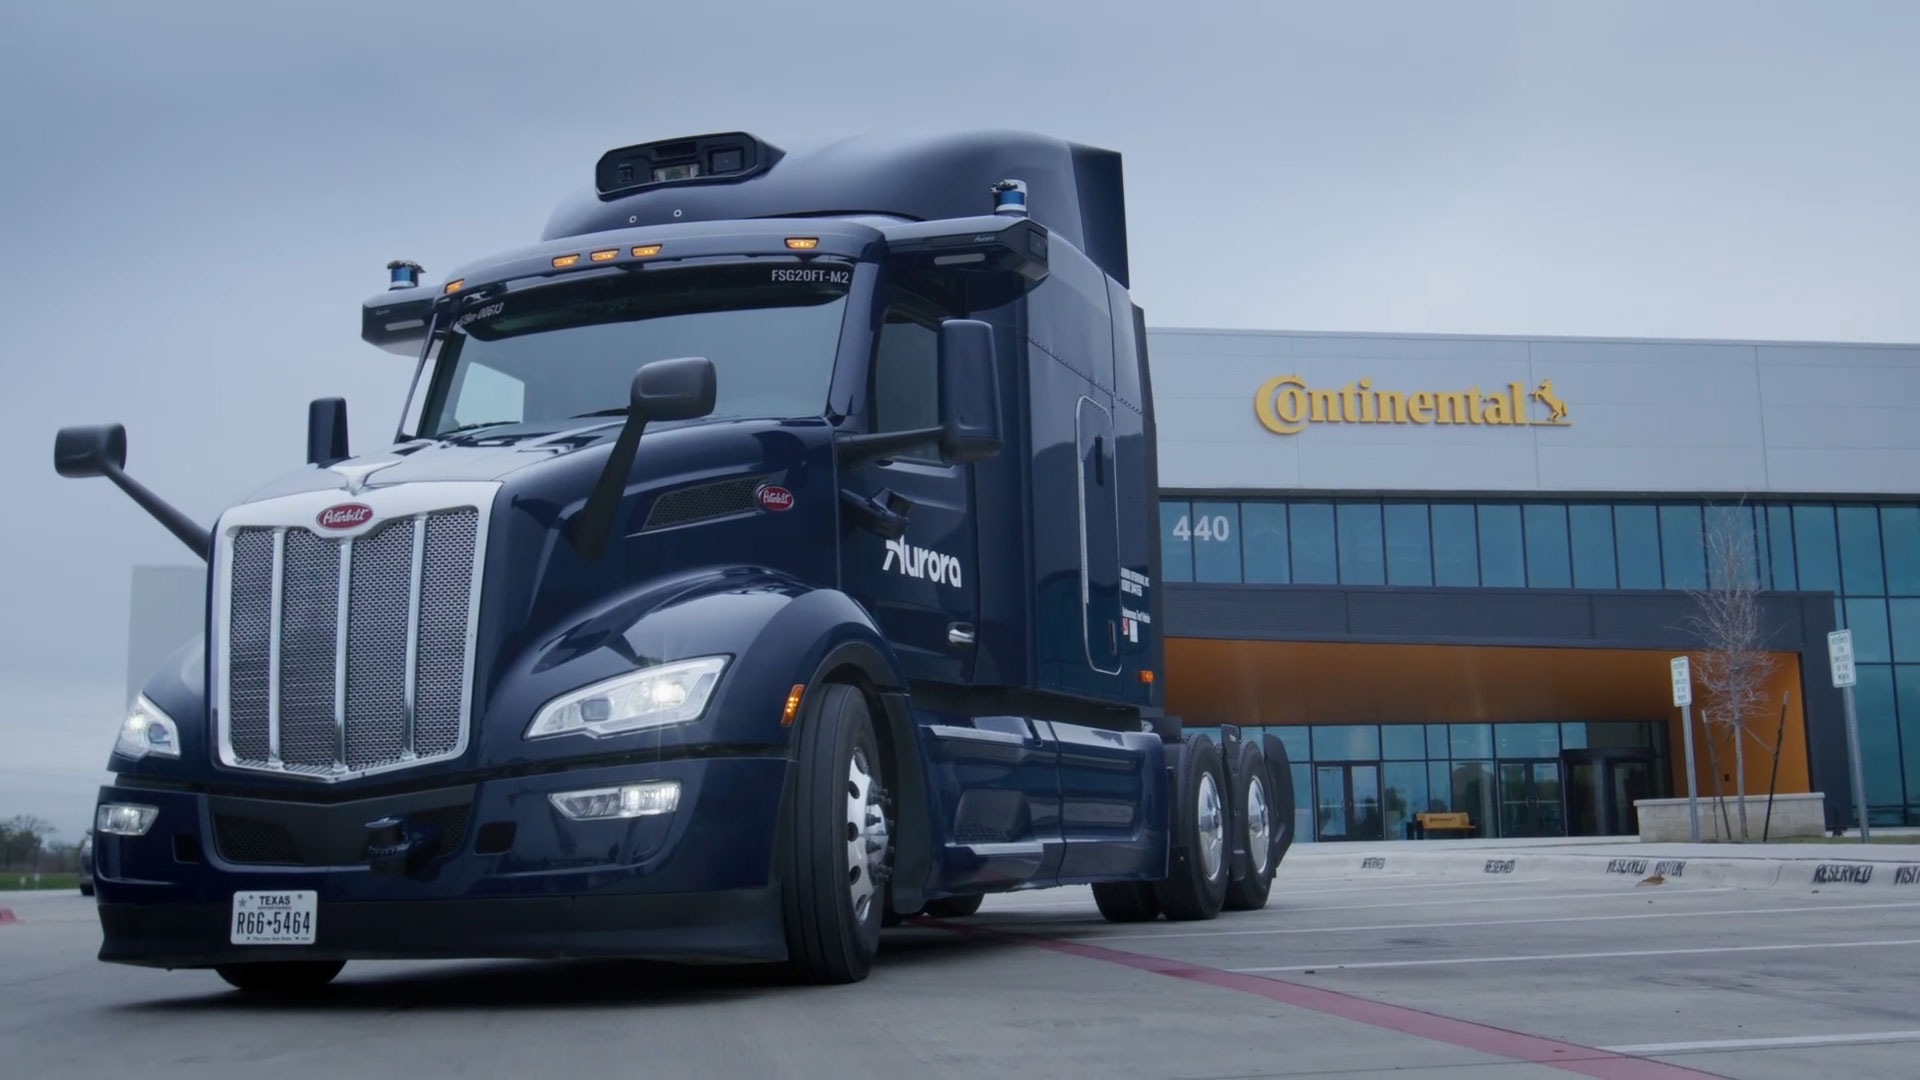 Continental and Aurora reach partnership milestone by finalizing design of world’s first scalable autonomous trucking system.